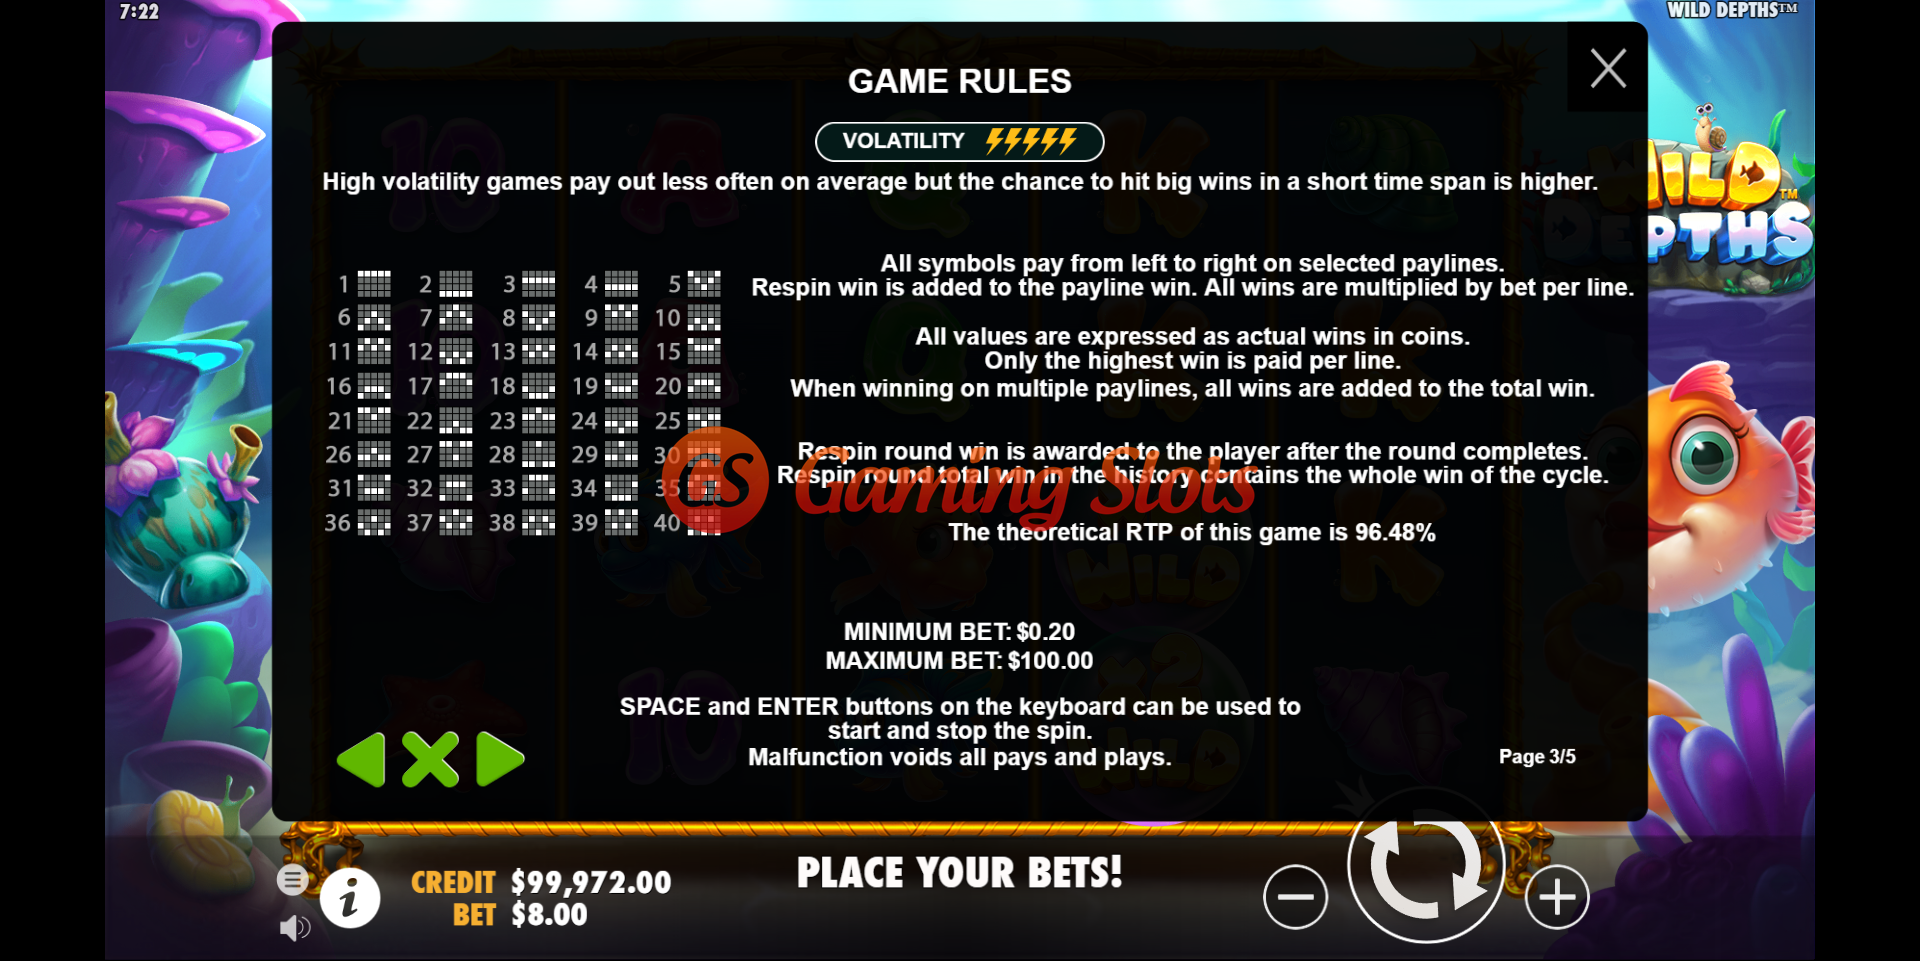 Game Rules for Wild Depths slot from Pragmatic Play